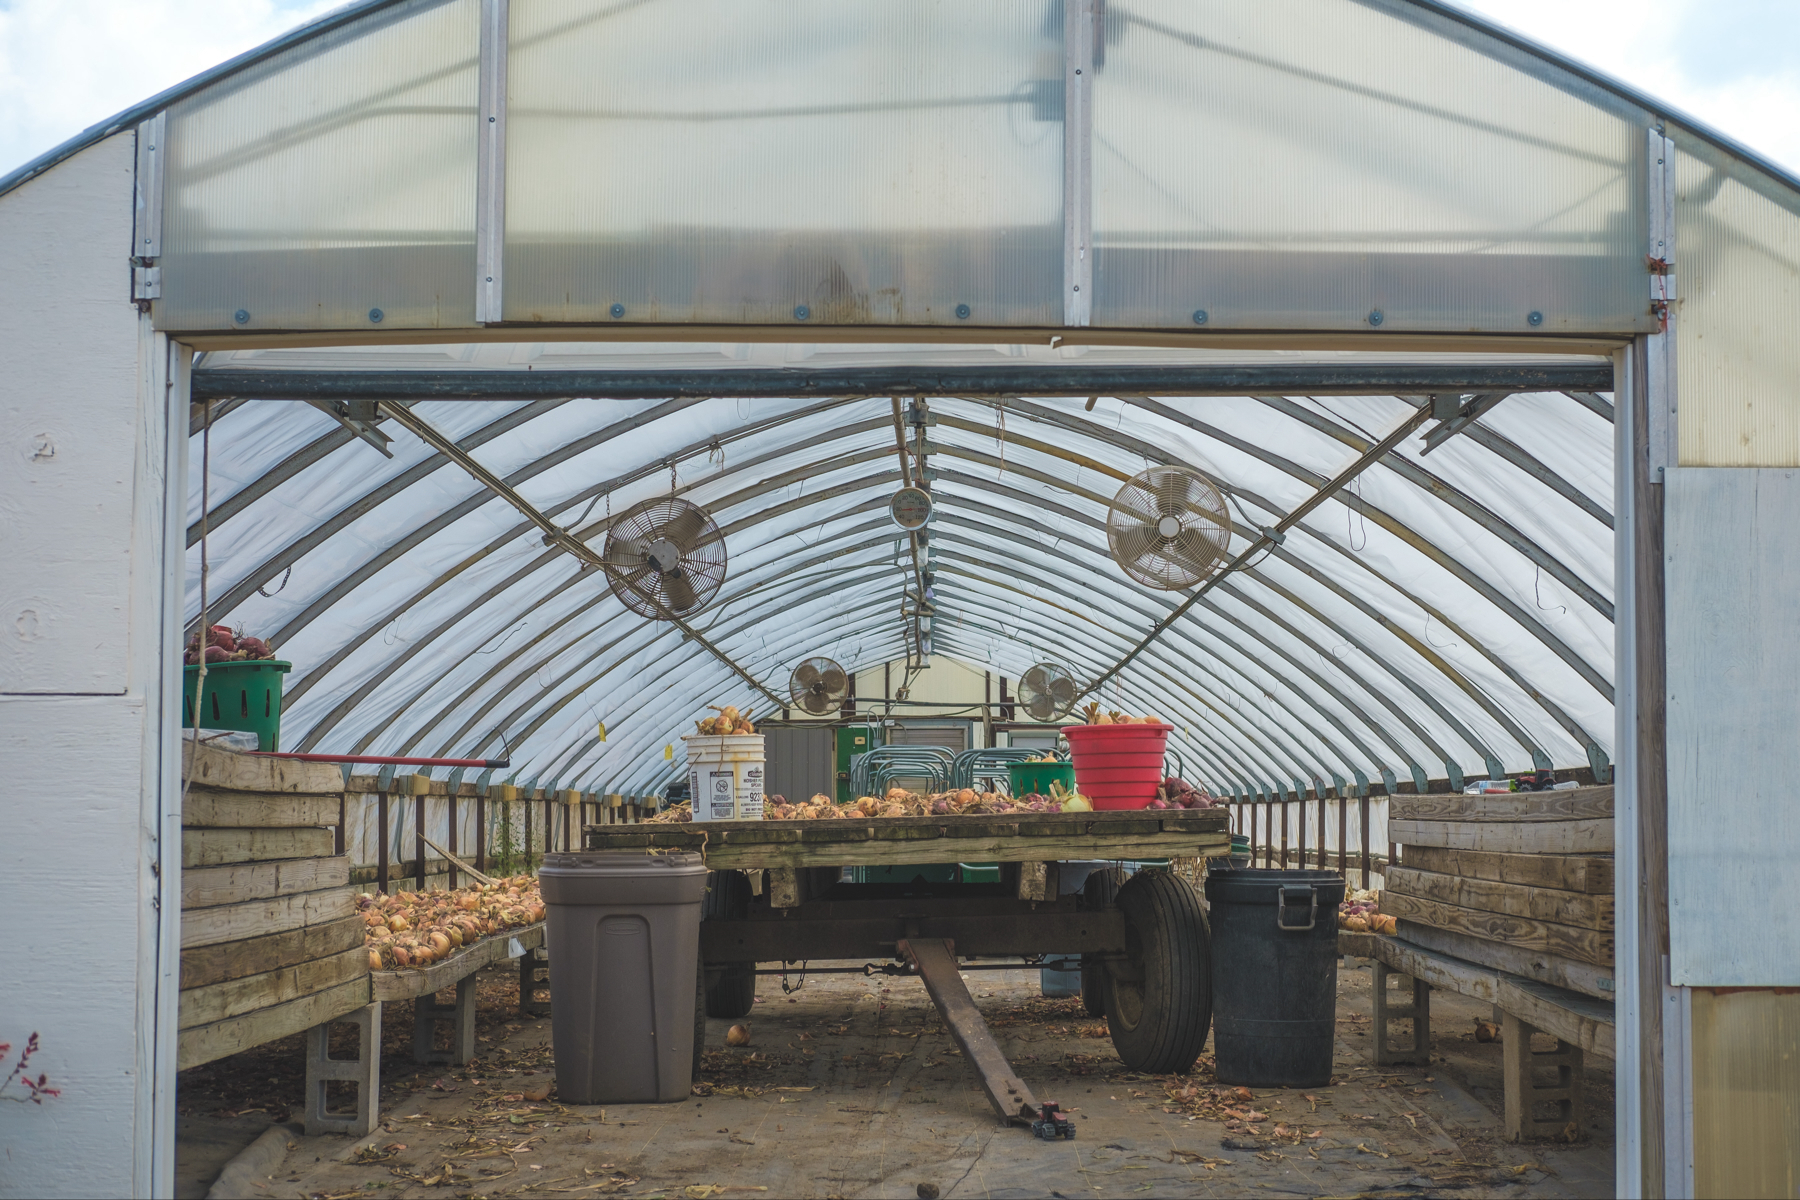 A greenhouse interior with stacks of onions on tables, a trailer, and large fans on the rear wall.